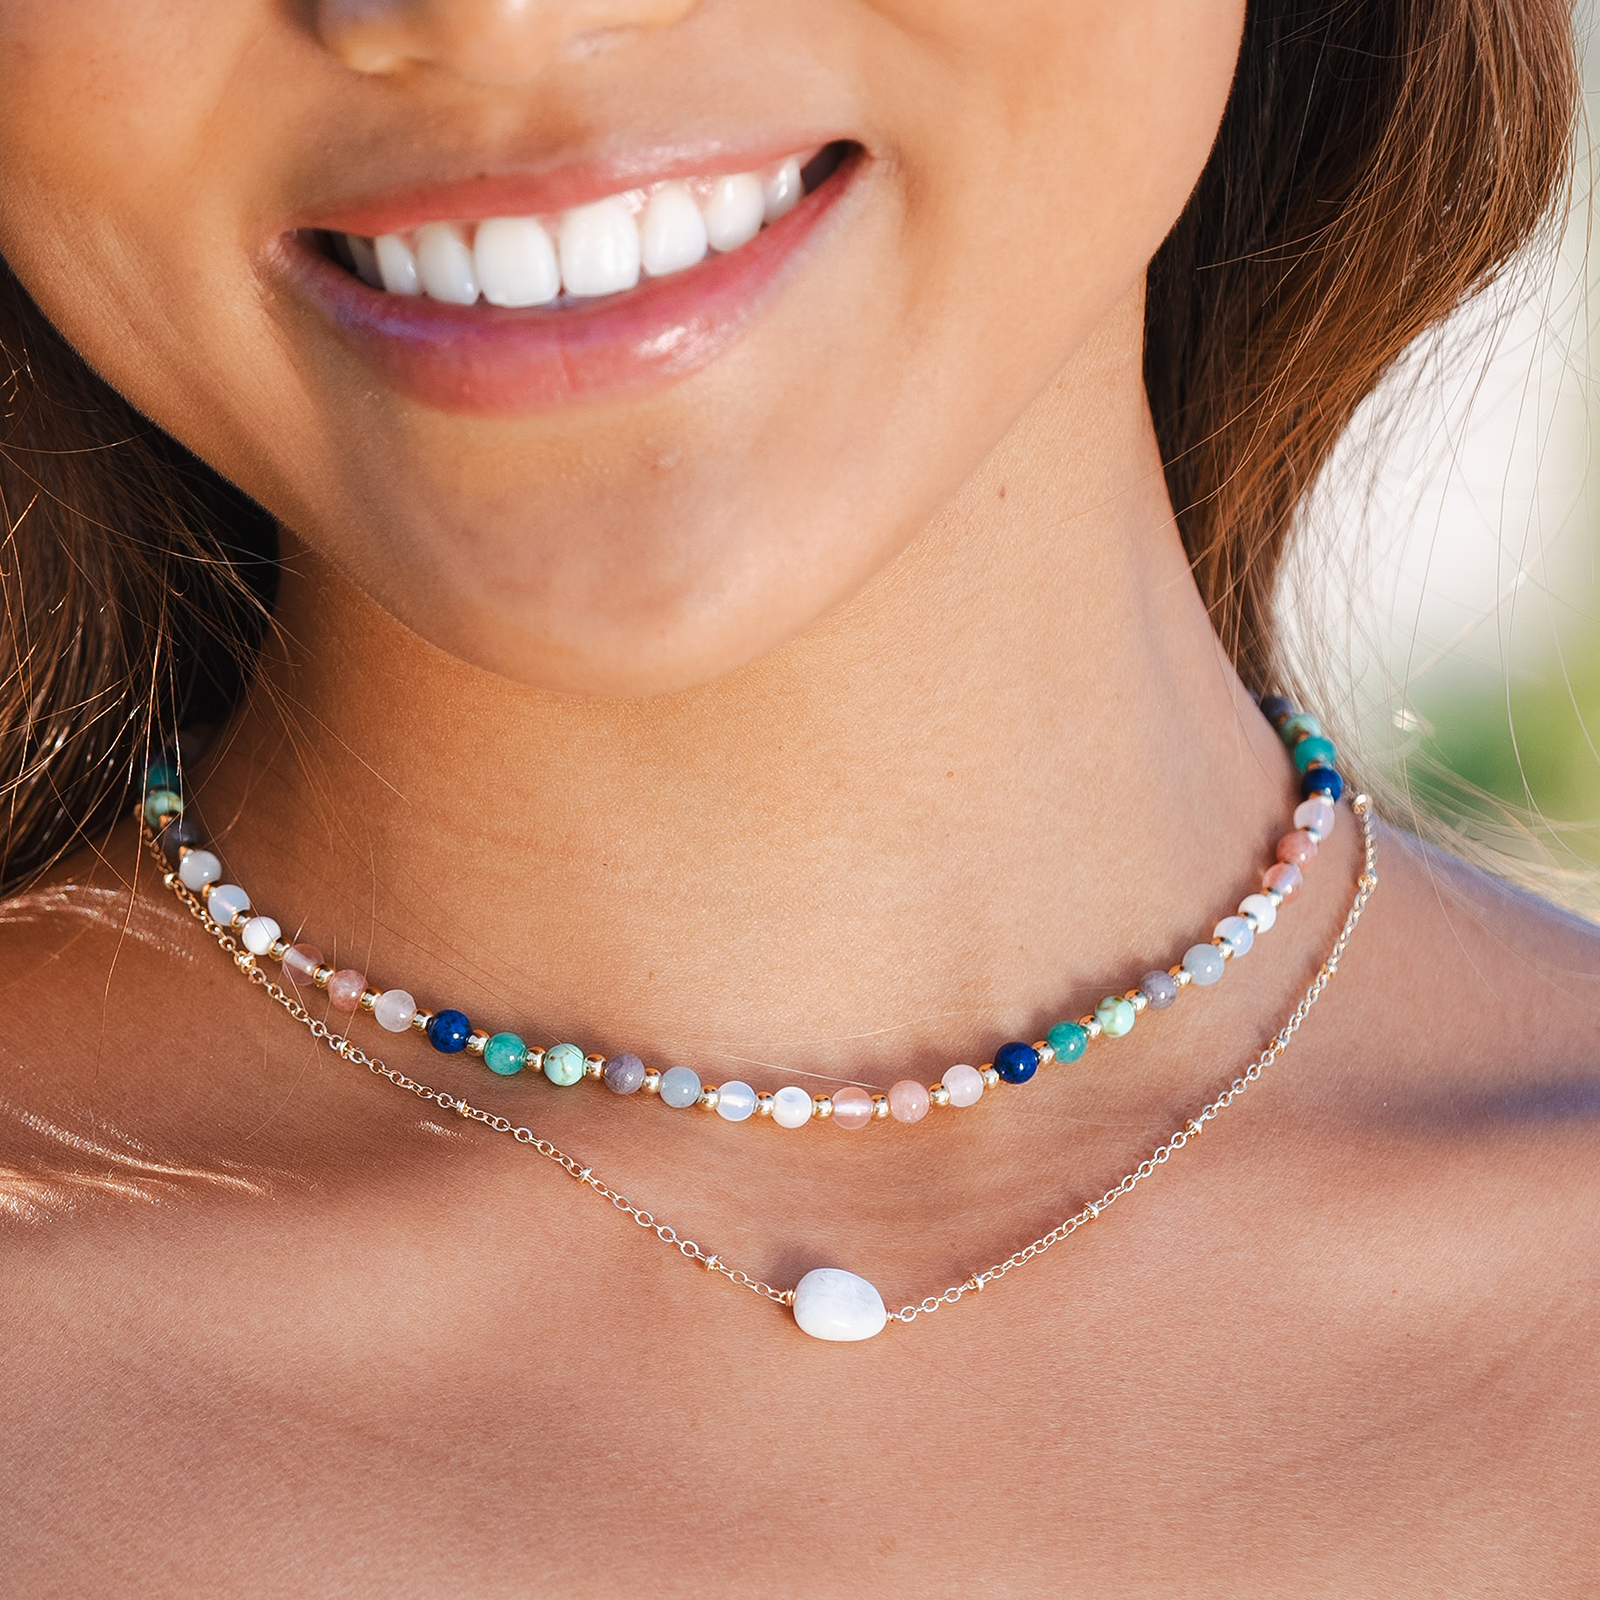 Model wearing a 4mm multicolor stone and gold bead healing necklace and a moonstone healing necklace with a gold chain.